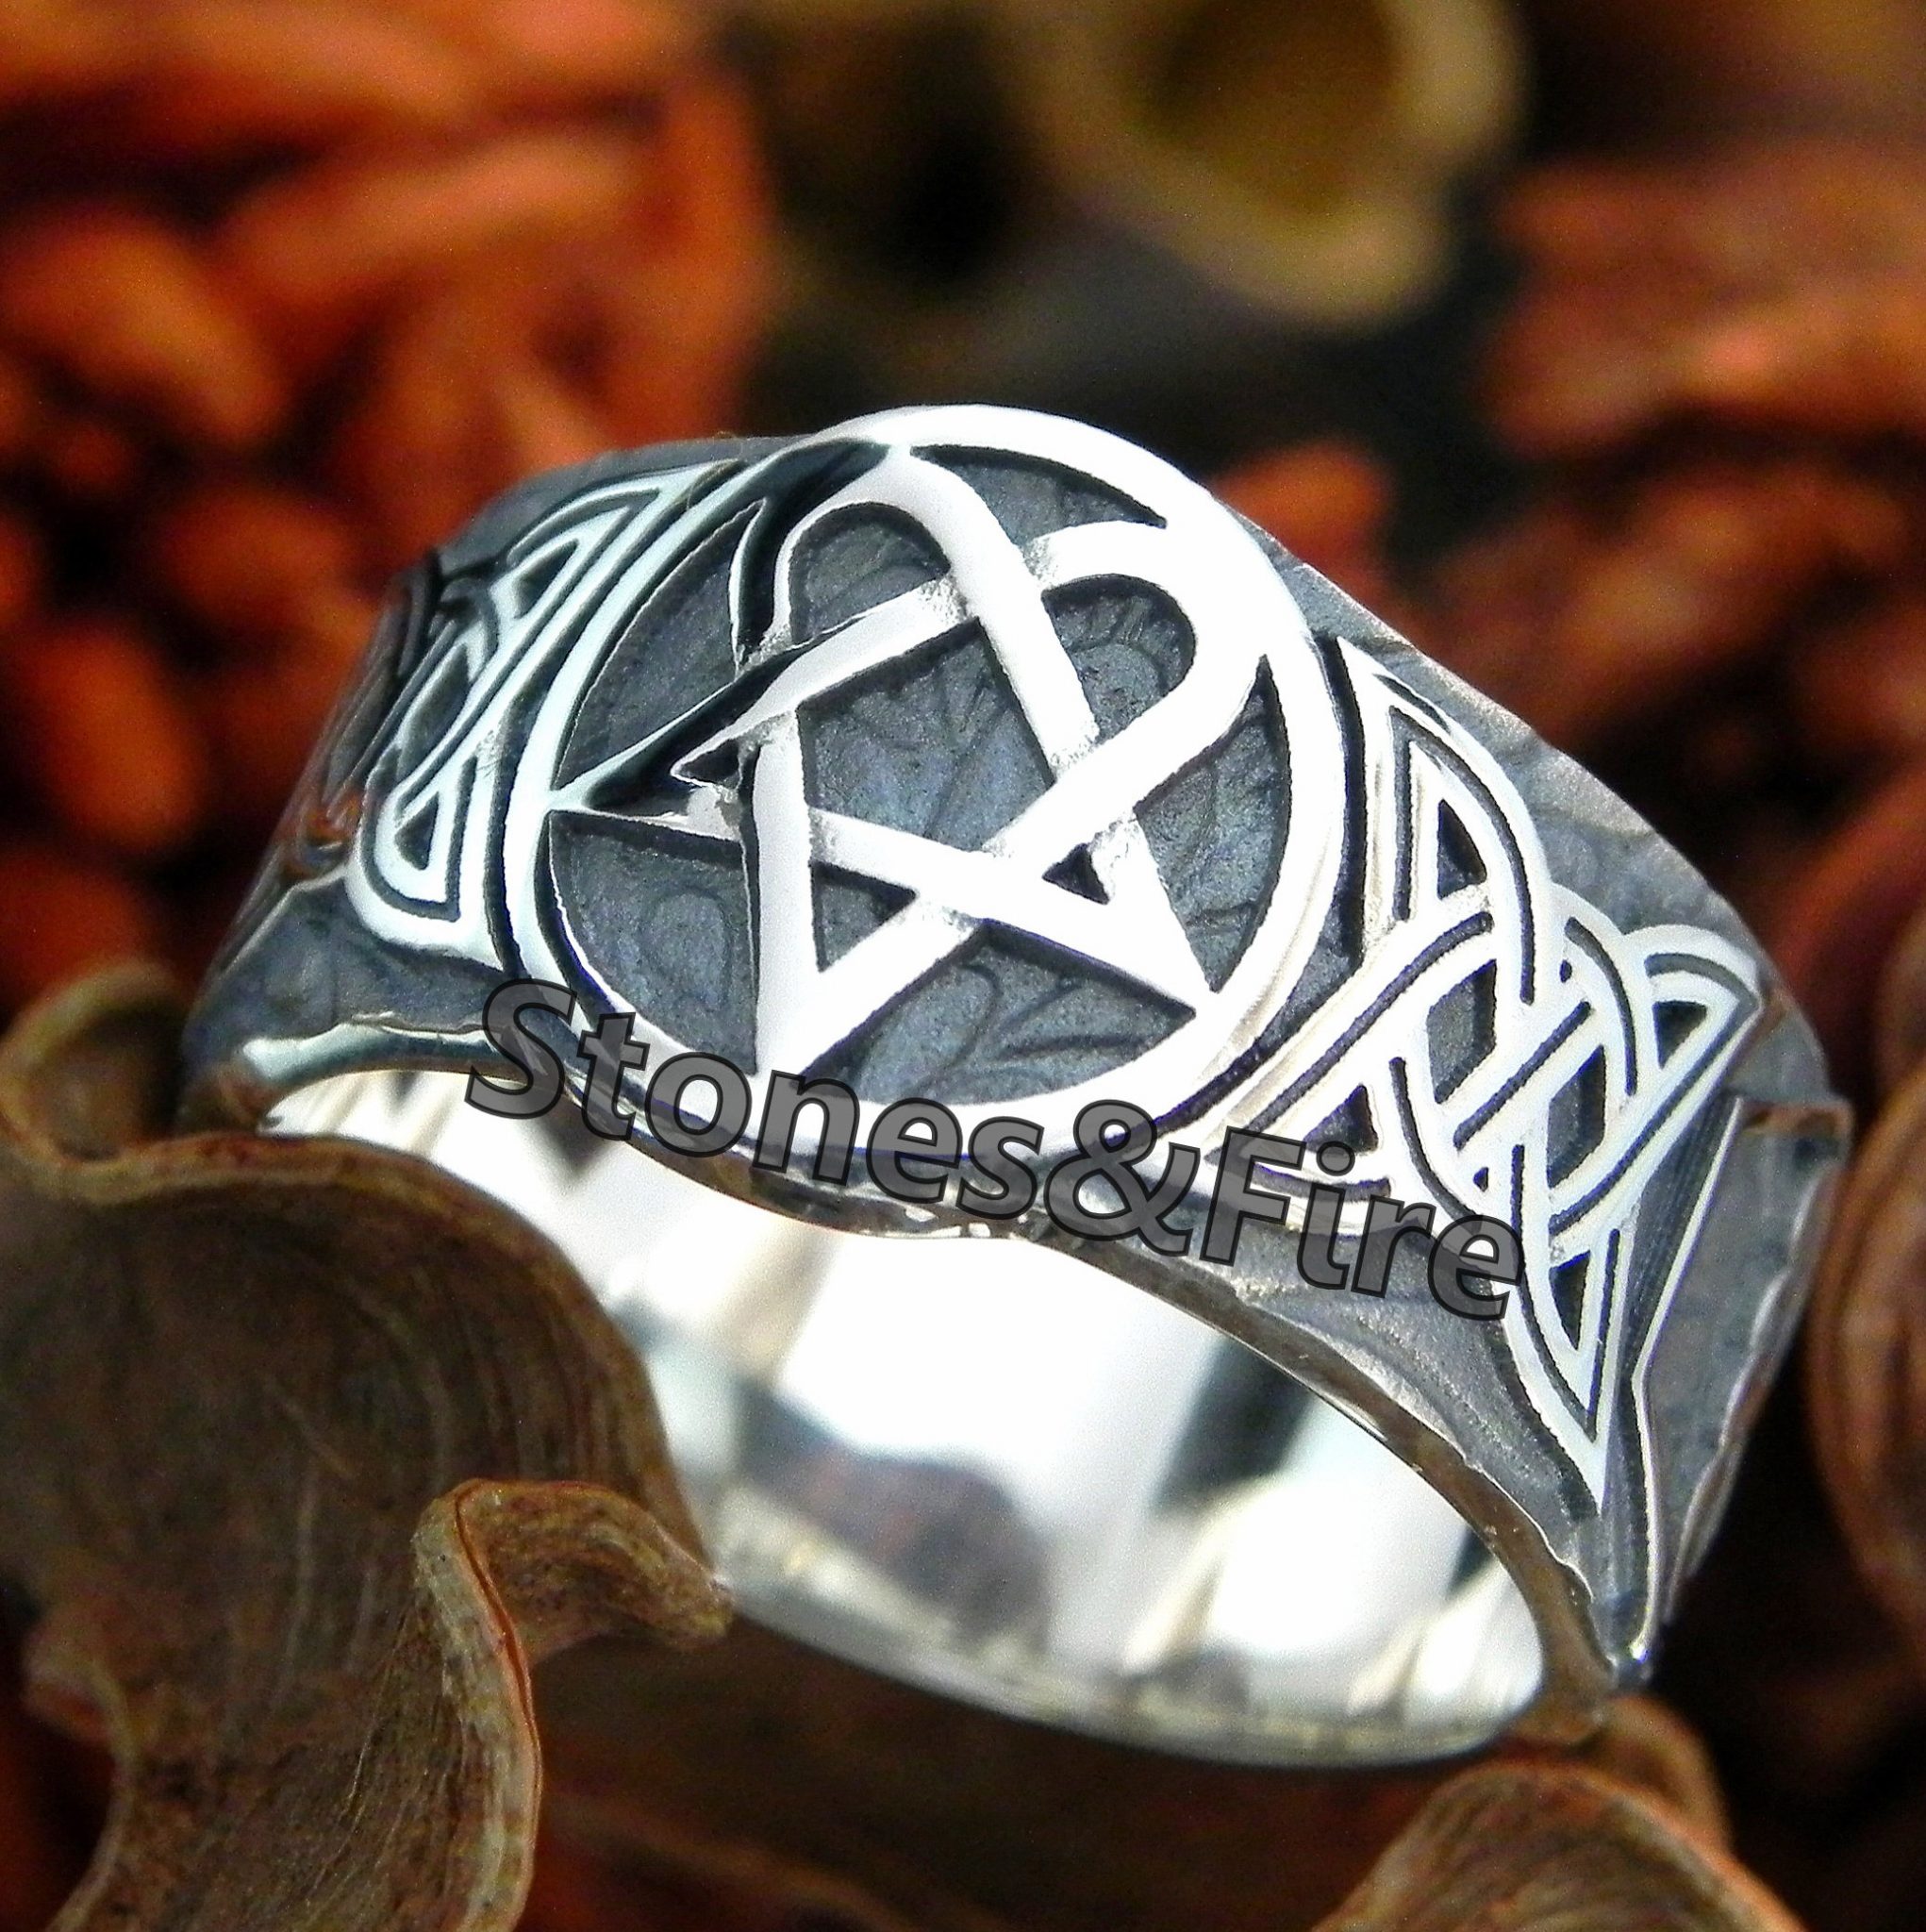 Gothic Metal Ring-CREATES TO ORDER • Stones&Fire